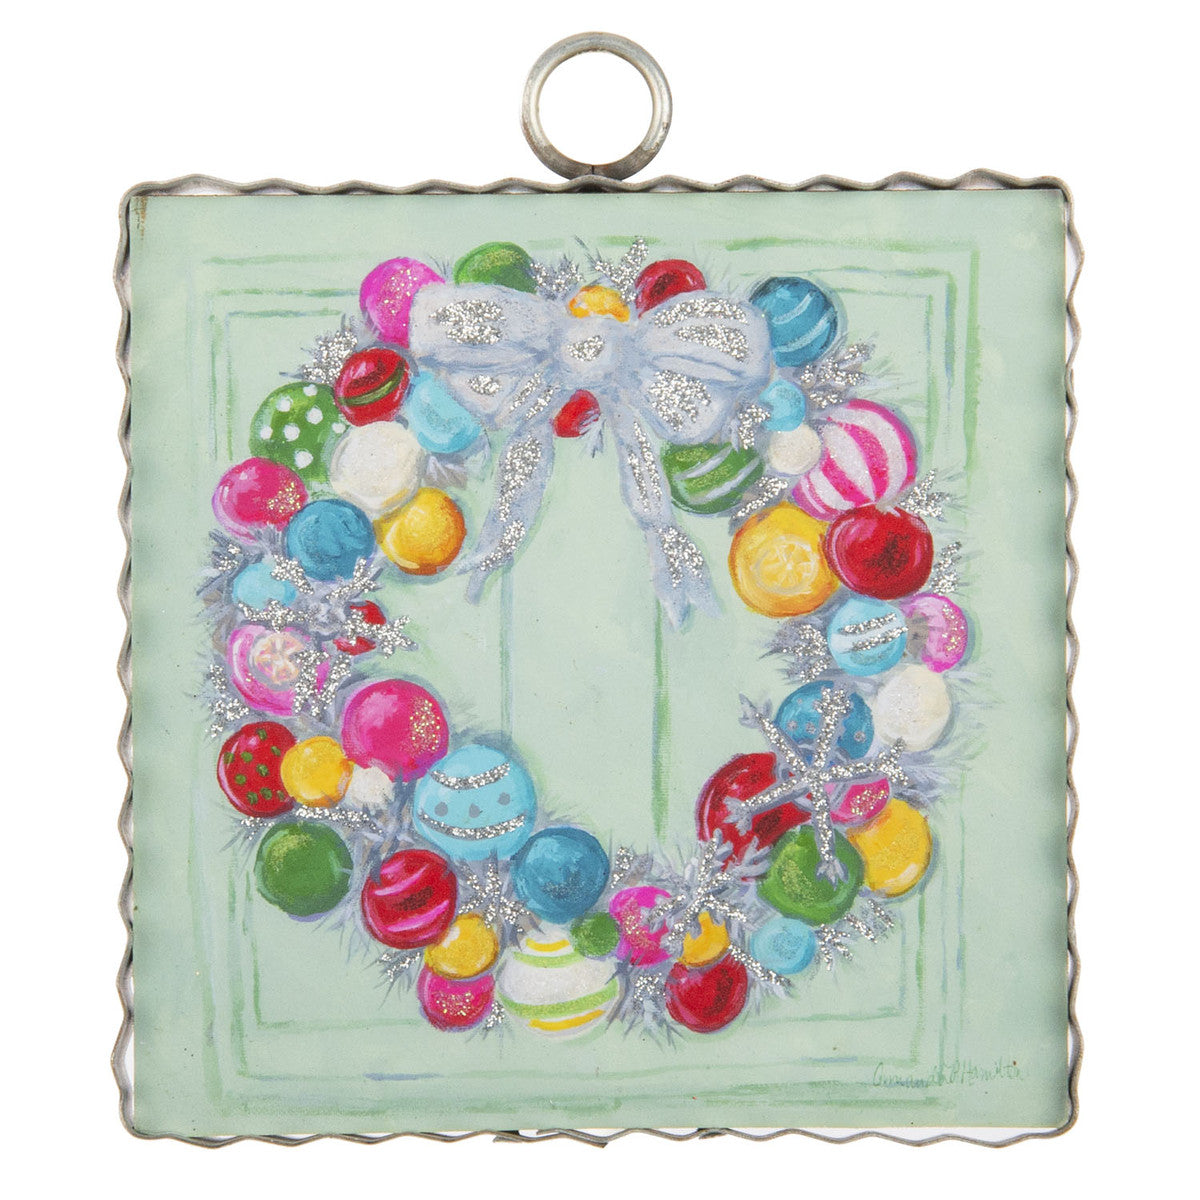 RTC Mini Wreath of Colorful Baubles Print